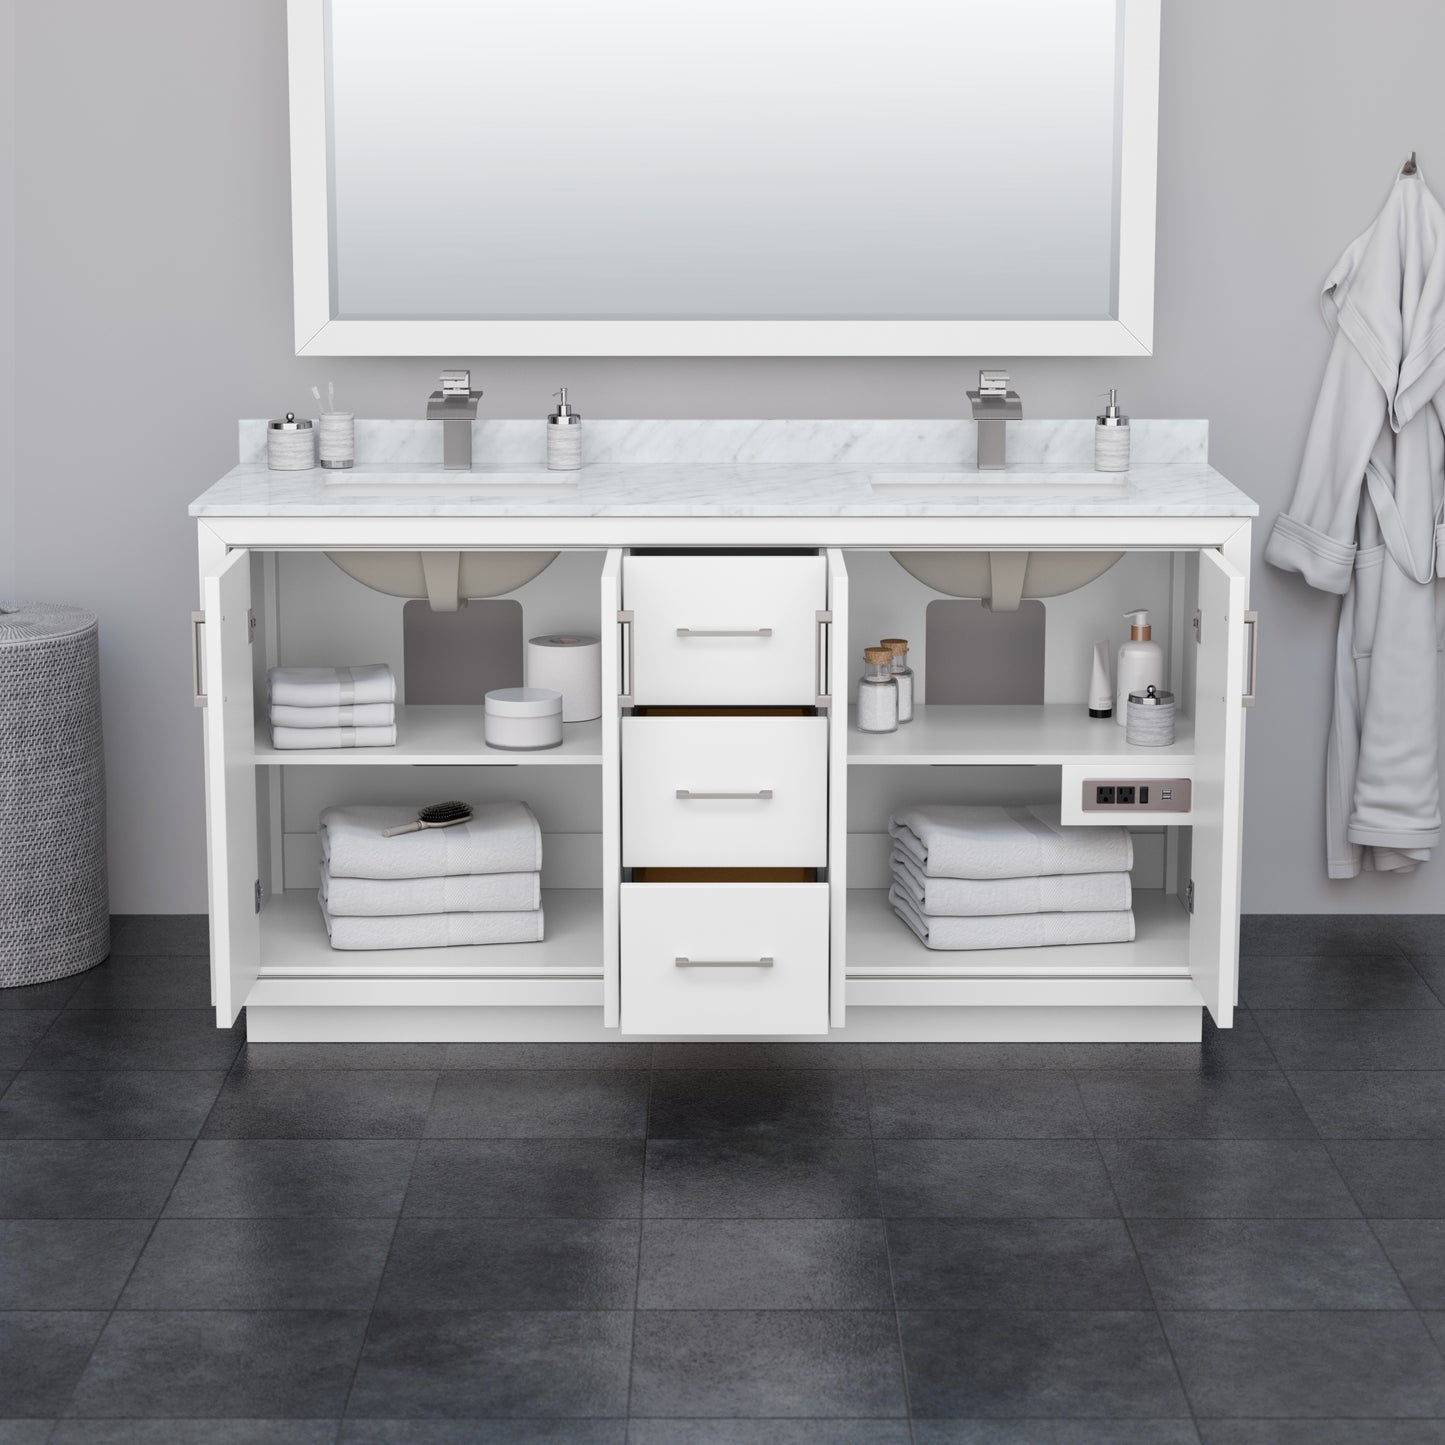 Wyndham Icon 66 Inch Double Bathroom Vanity in White with Carrara Cultured Marble Countertop, Undermount Square Sinks and Satin Bronze Trim - Luxe Bathroom Vanities